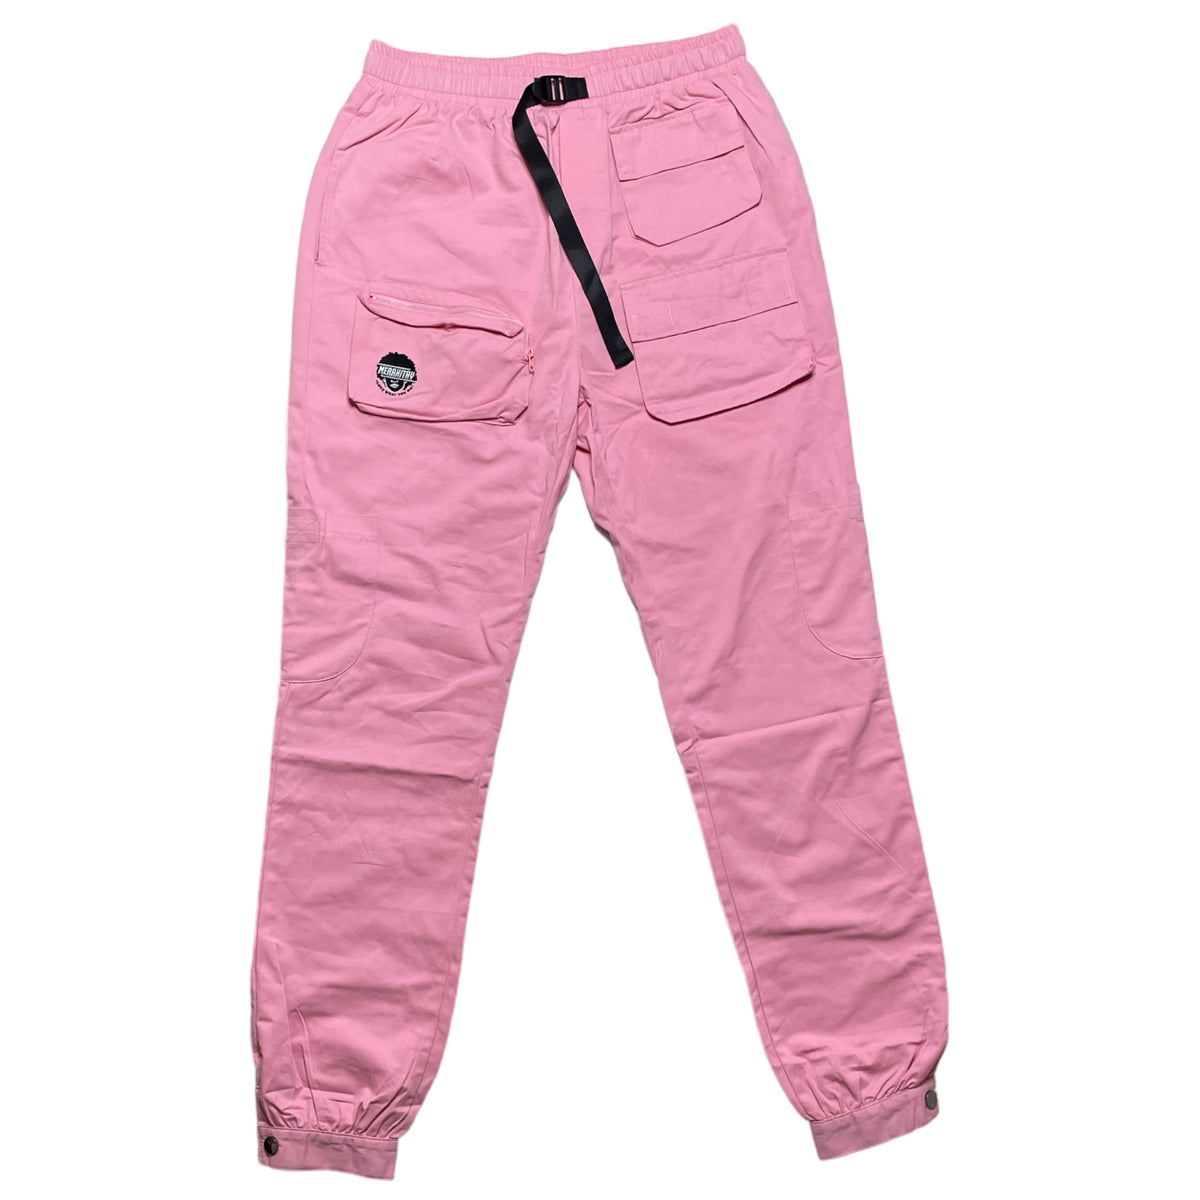 Free Shipping-HOT PINK CARGO PANTS · NEW ARRIVAL · Online Store Powered by  Storenvy